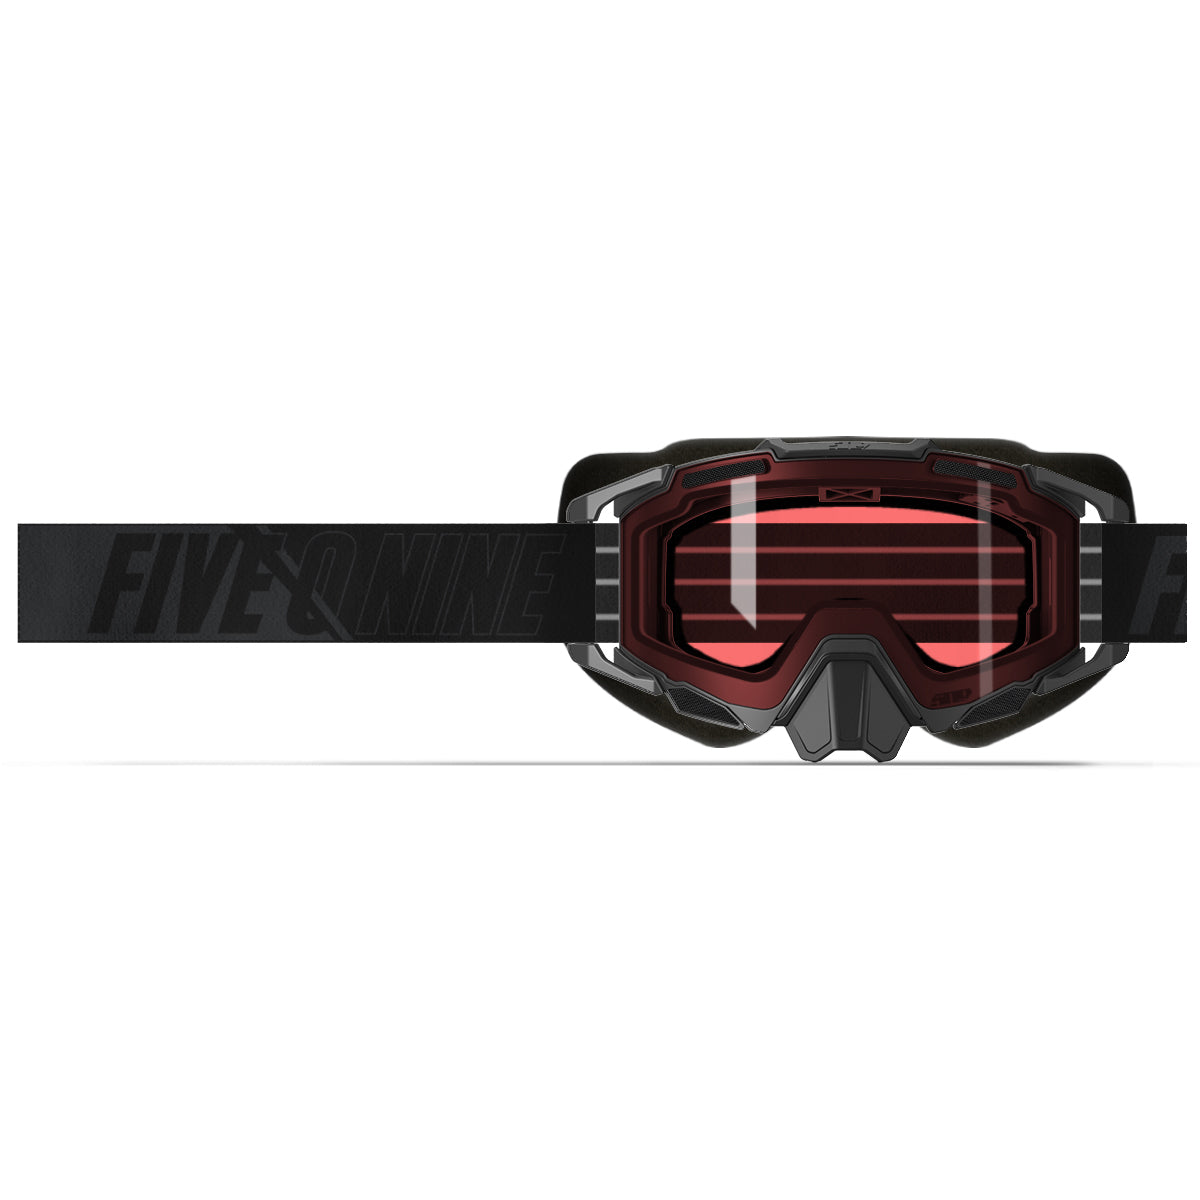 Sinister XL7 Goggle